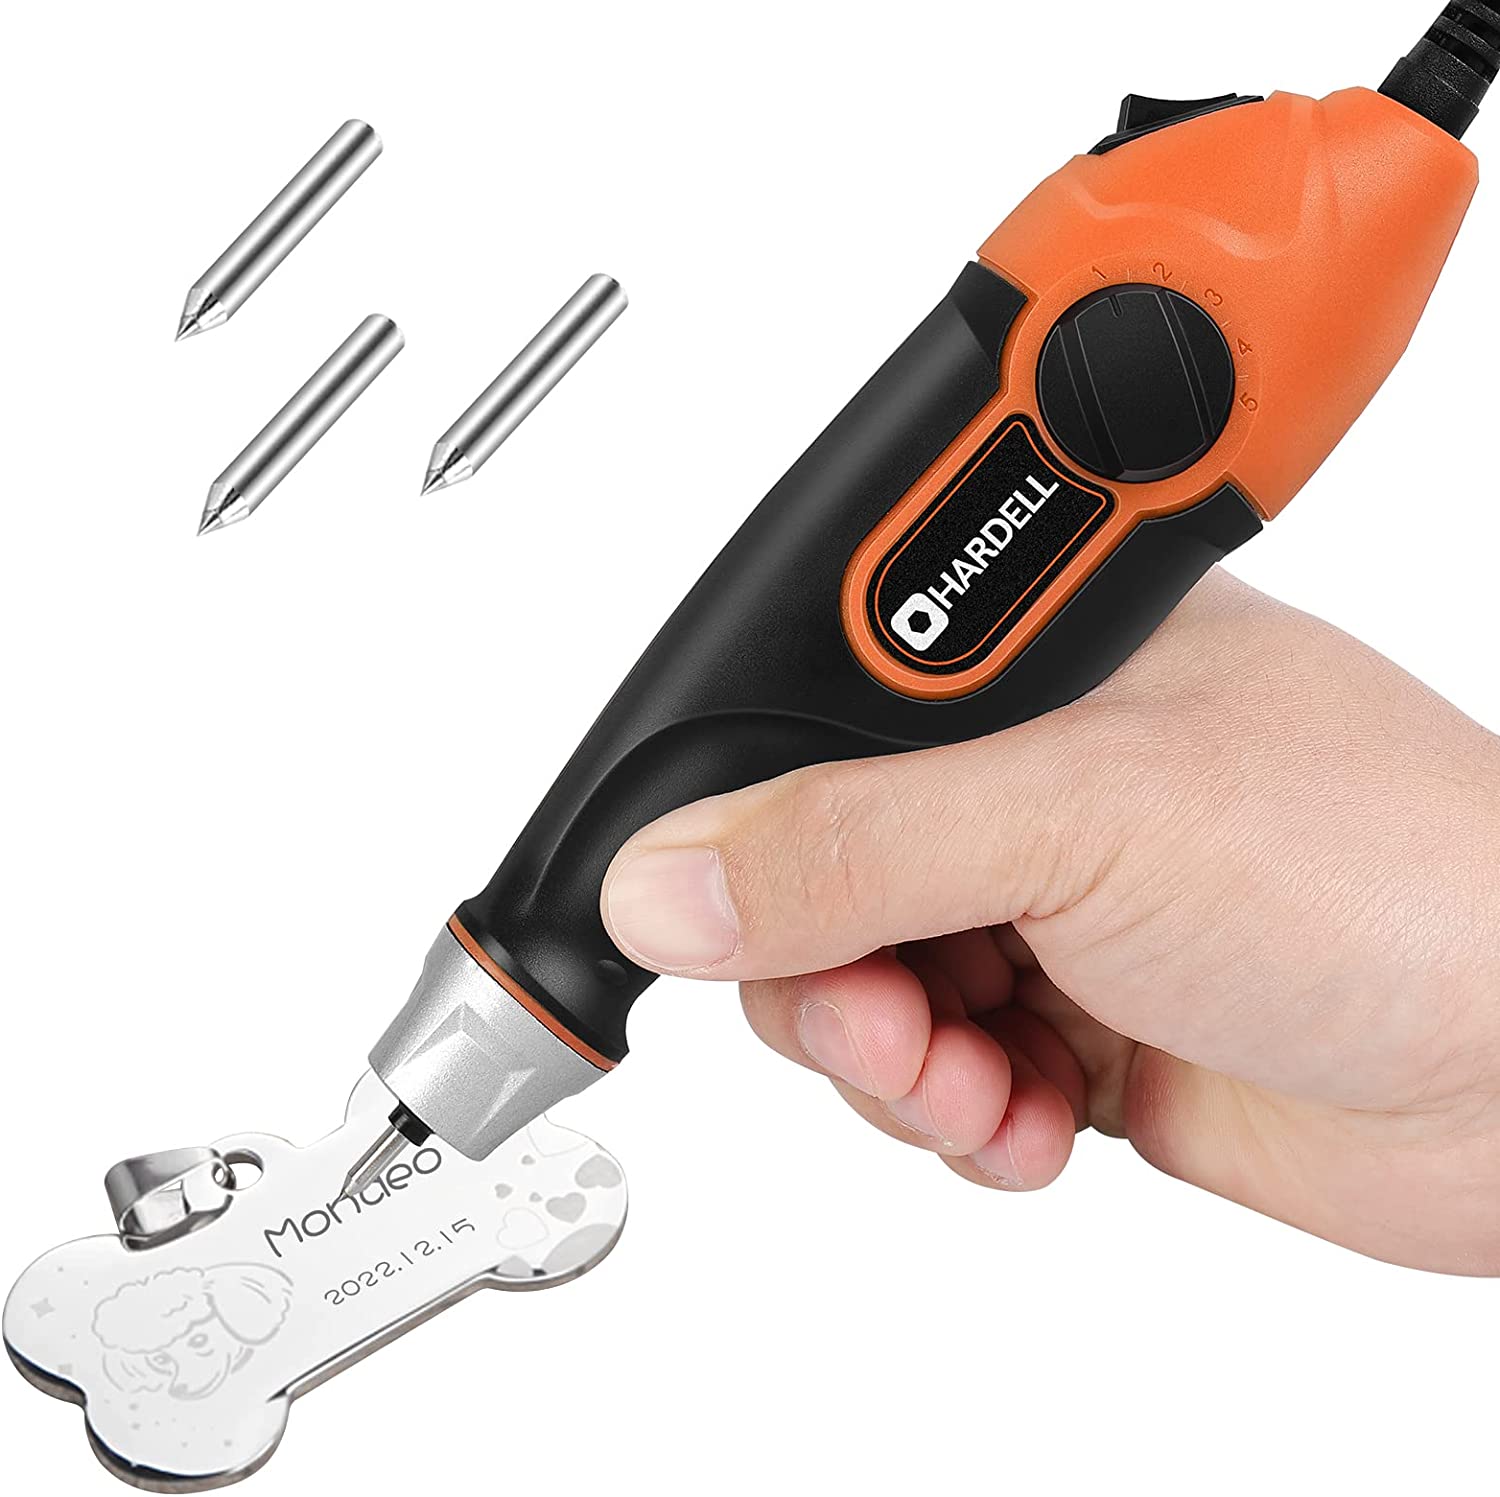 Engraving Pen with 34Bits, Portable Engraving Pen Electric Cordless Tool